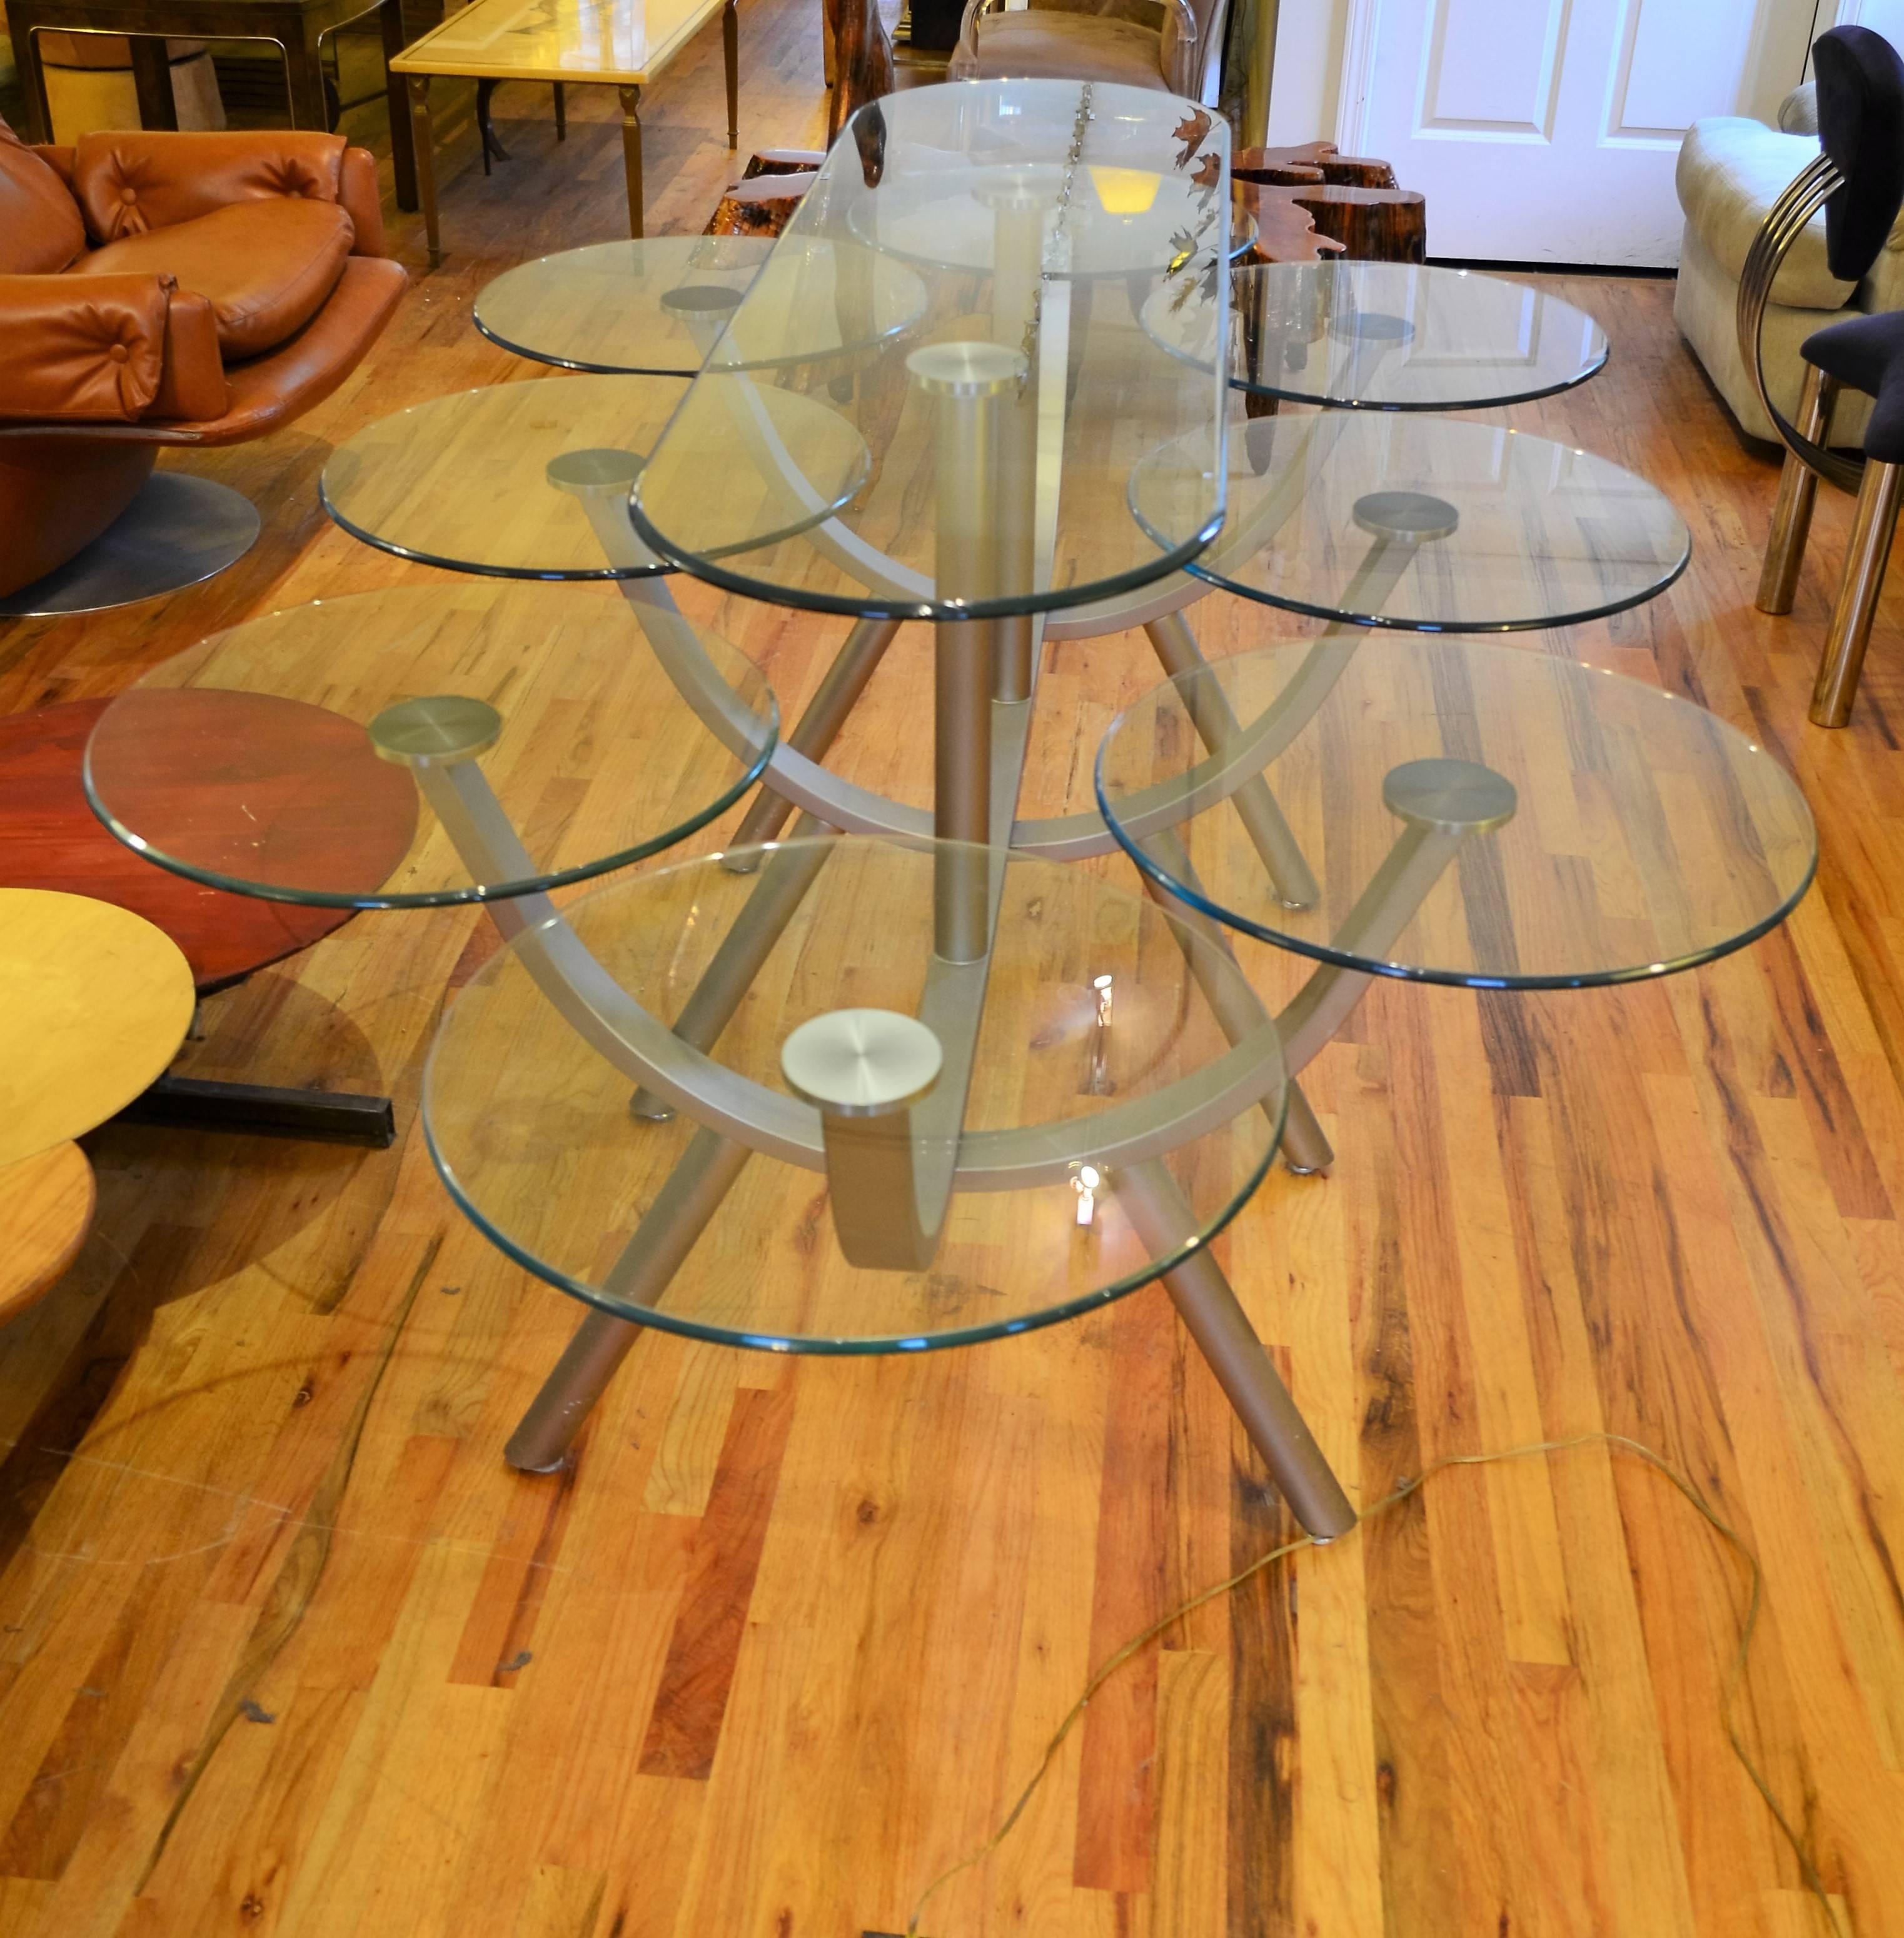 Mid-Century Modern Glass Dining Table From Design Institute of America's Circle of Life Collection